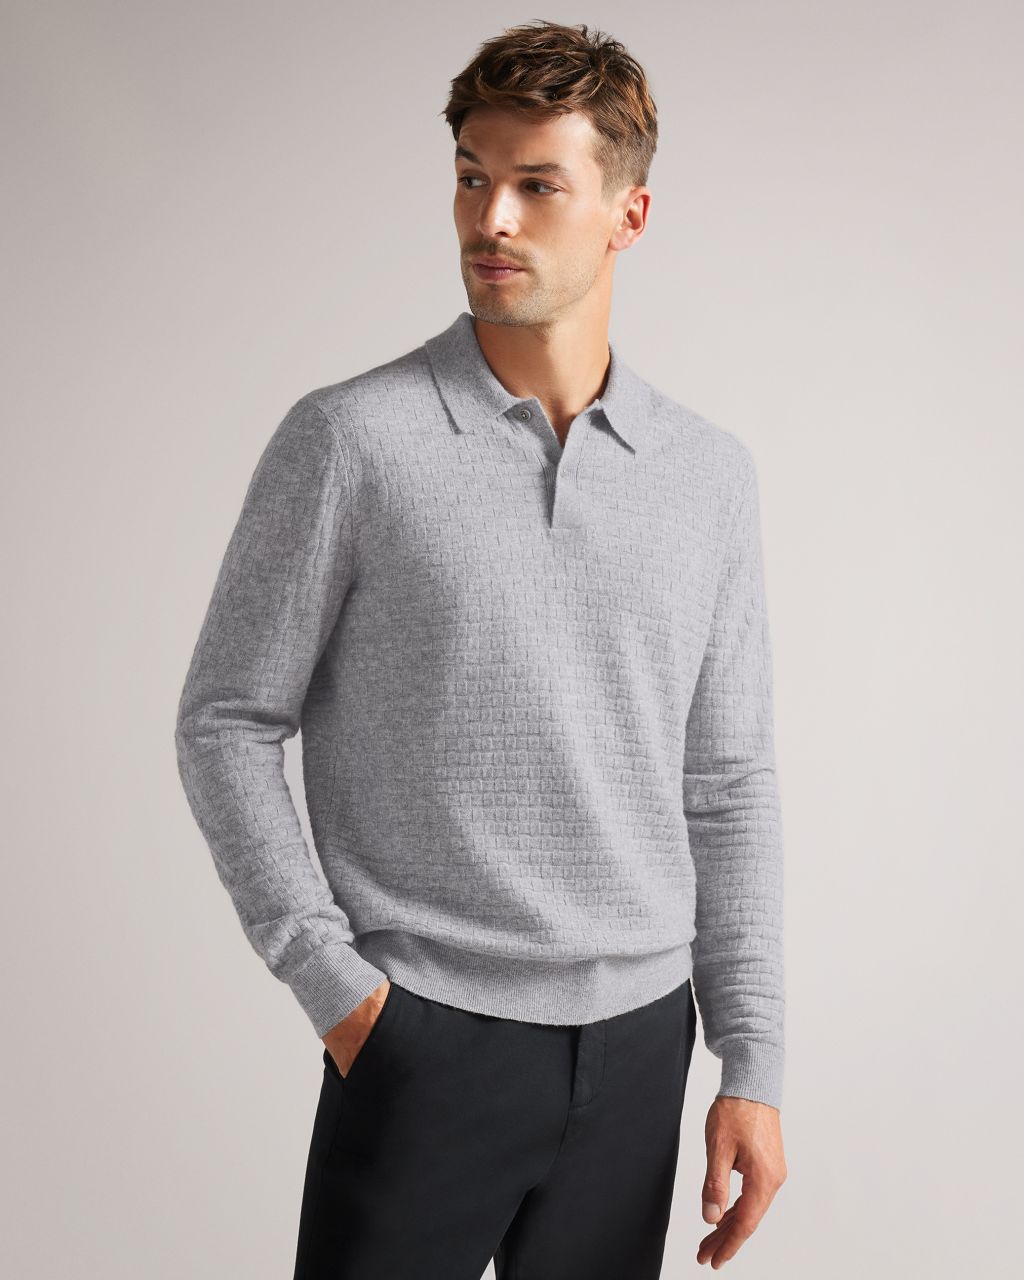 Men's Long Sleeve Knitted Polo Shirt In Grey, Patter